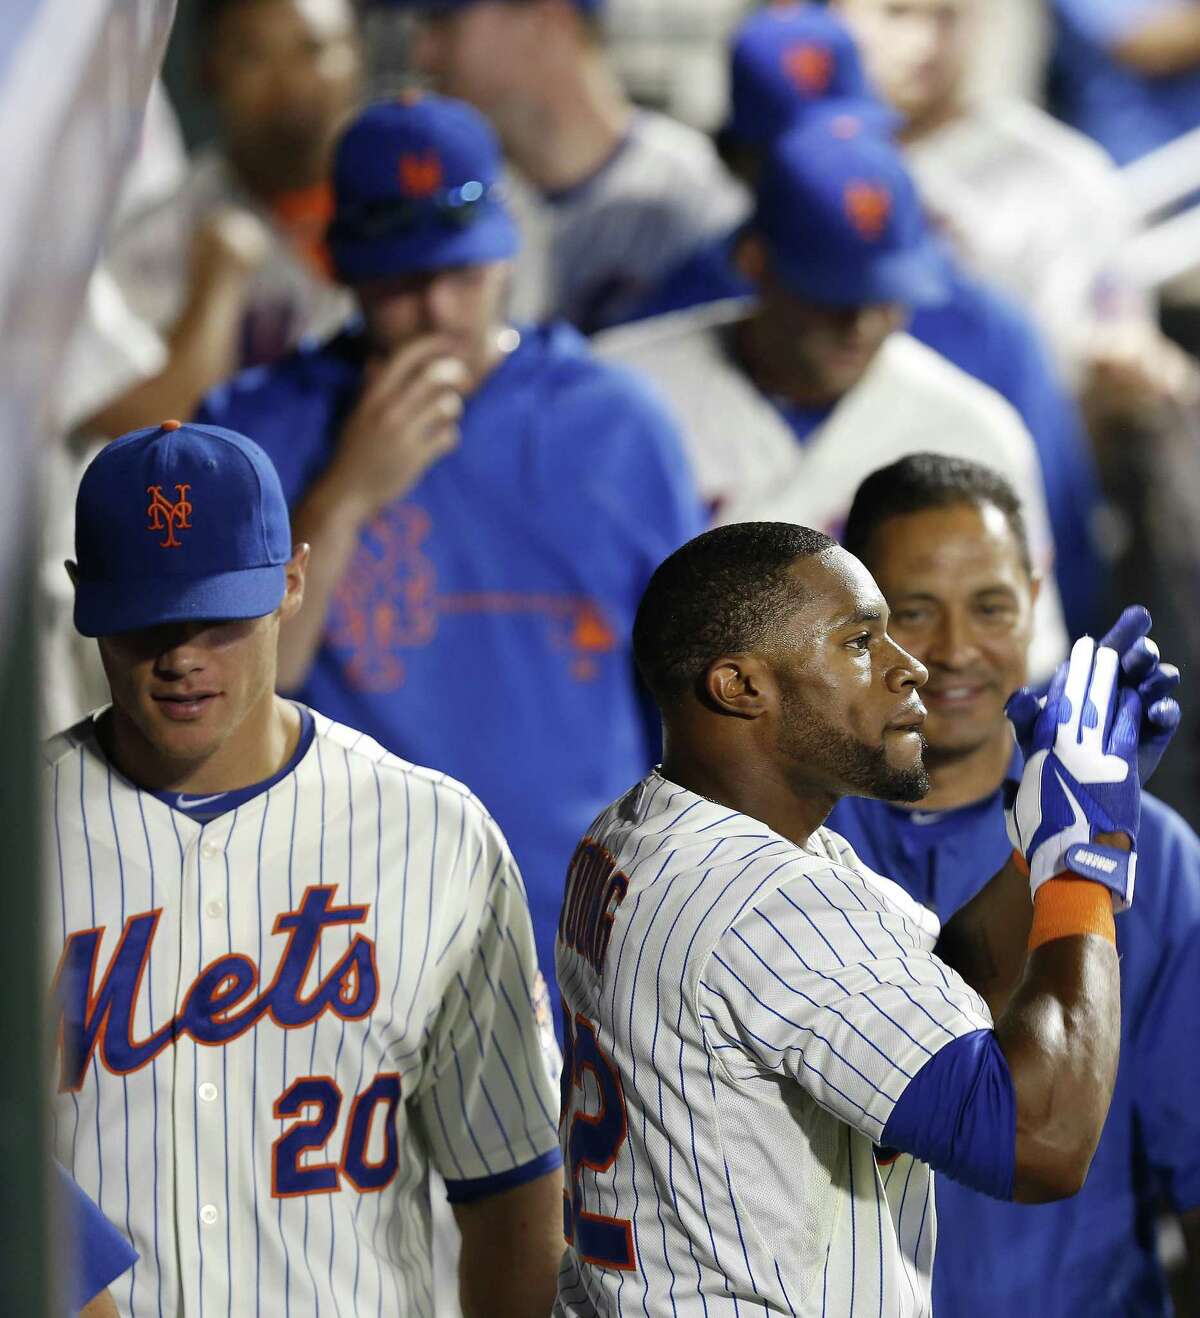 New York Mets left fielder Eric Young Jr., right, celebrates in the dugout after scoring a run in the eighth inning against the Colorado Rockies Tuesday. (AP Photo/John Minchillo).